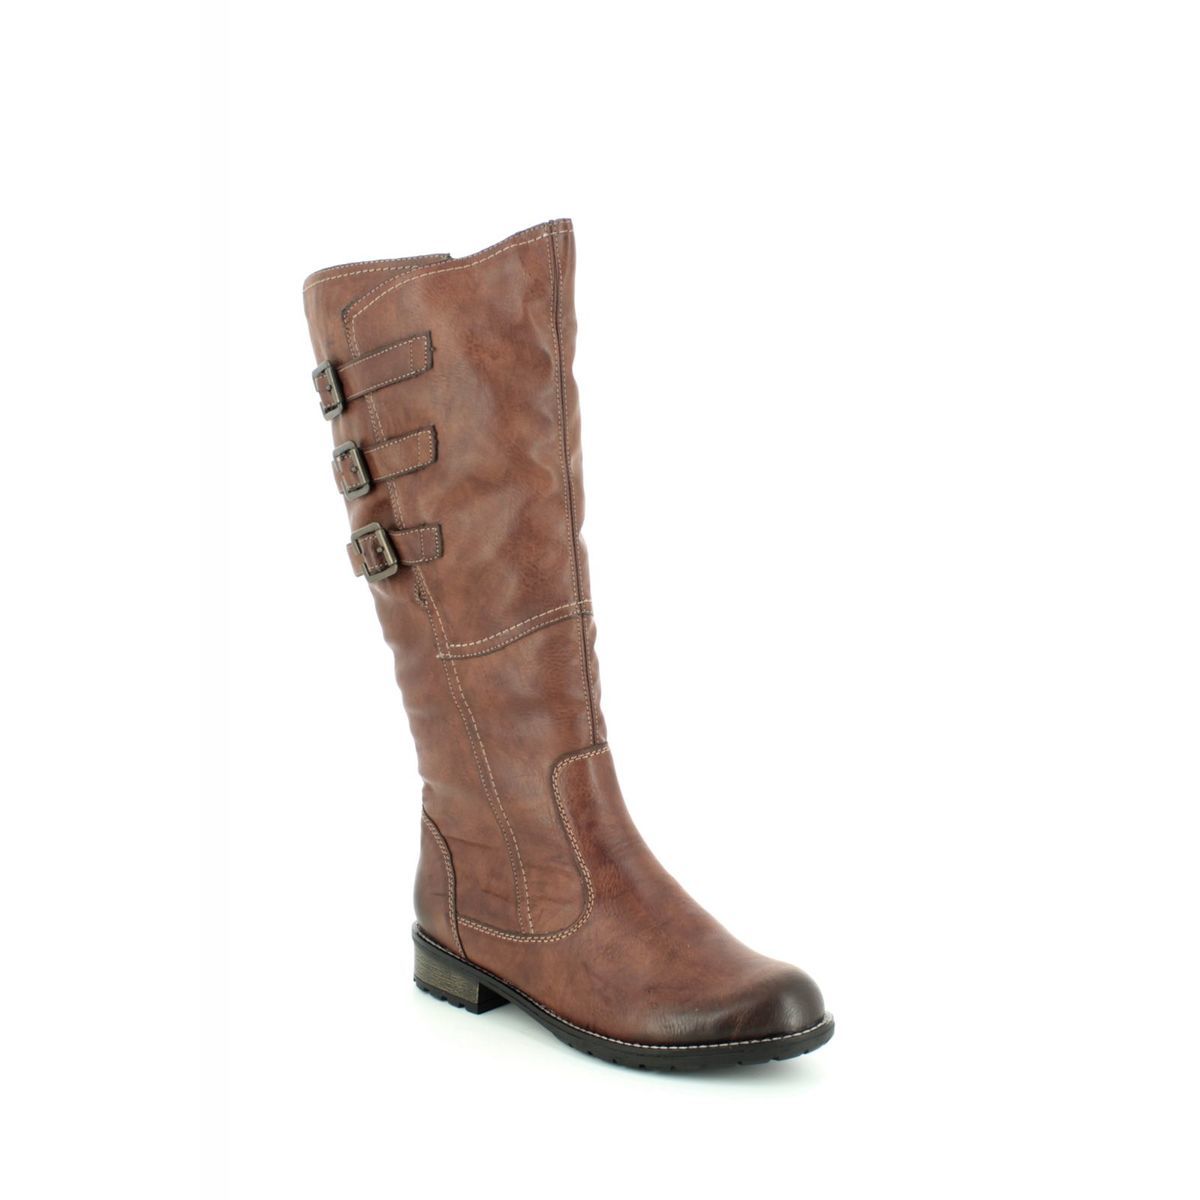 Remonte Shebuc Wide Calf Tan Womens Knee-High Boots R3370-22 In Size 38 In Plain Tan